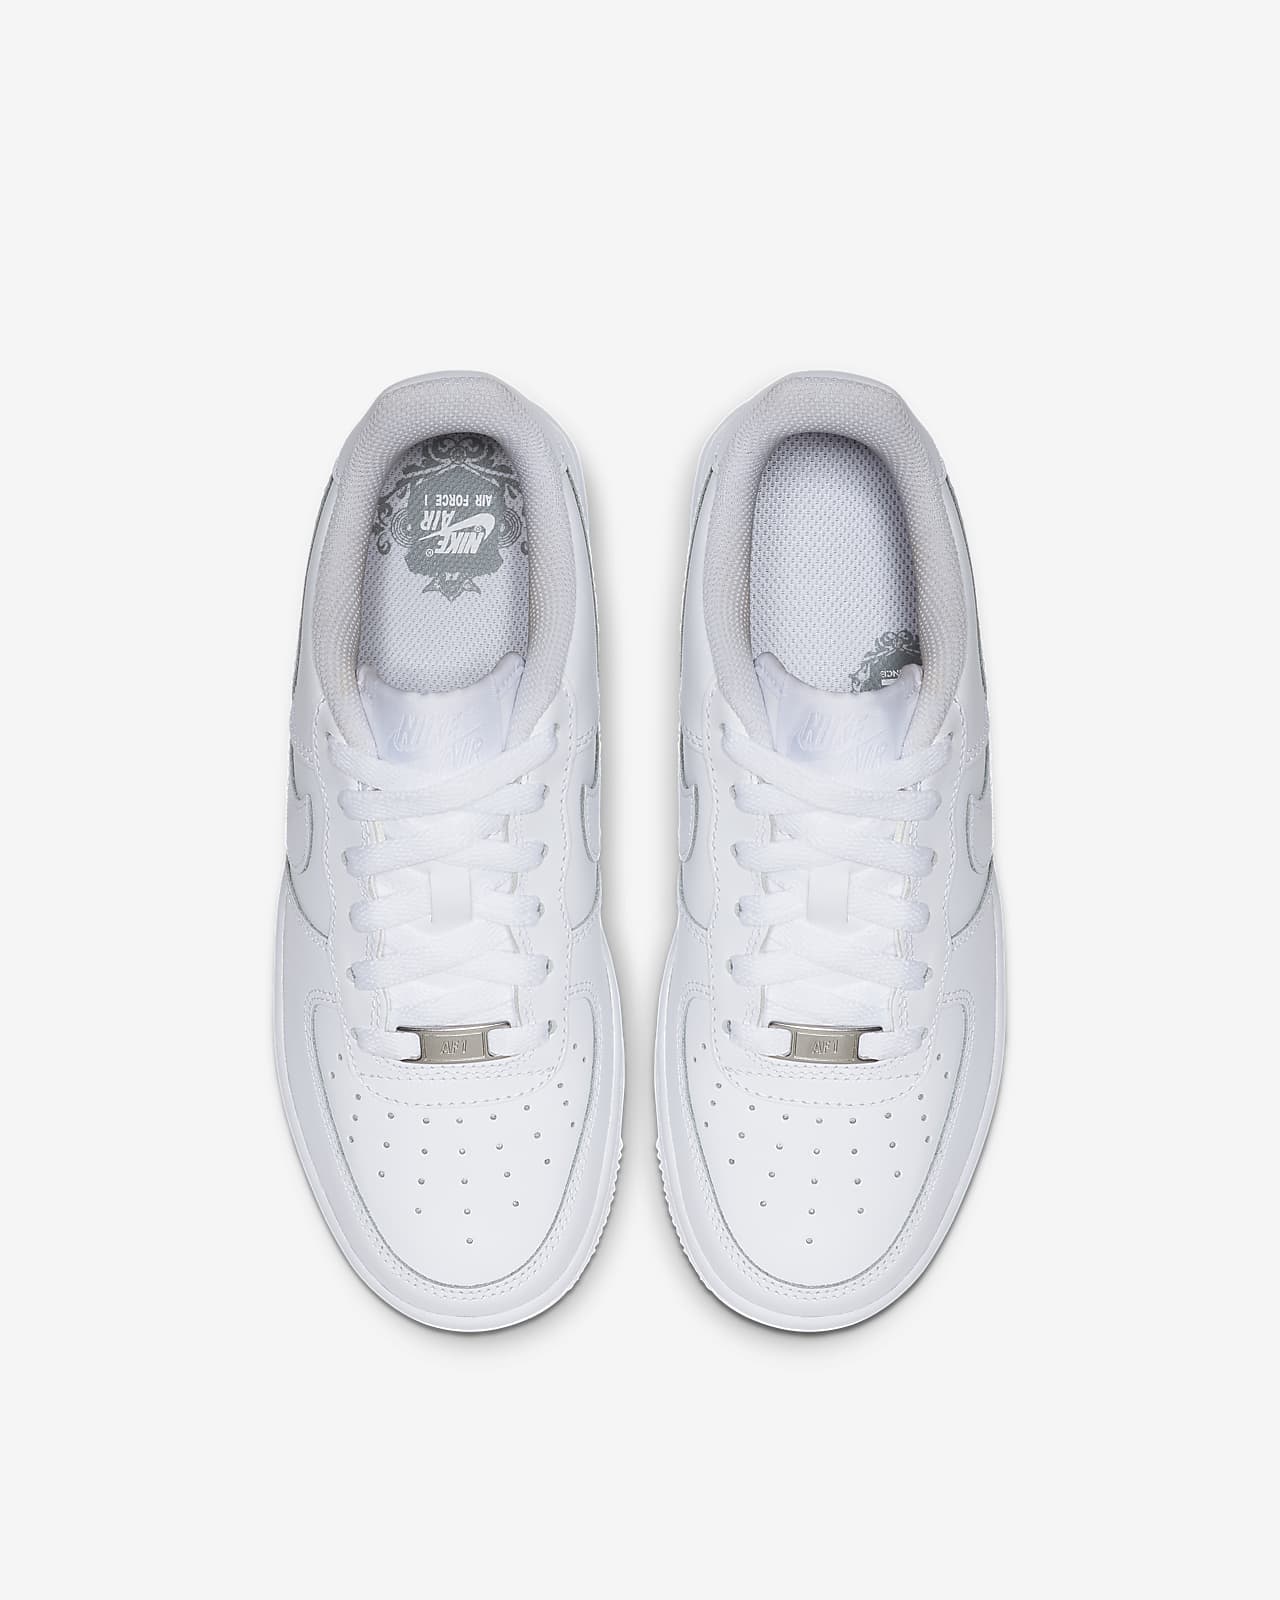 nike air force 1 low white size 4.5